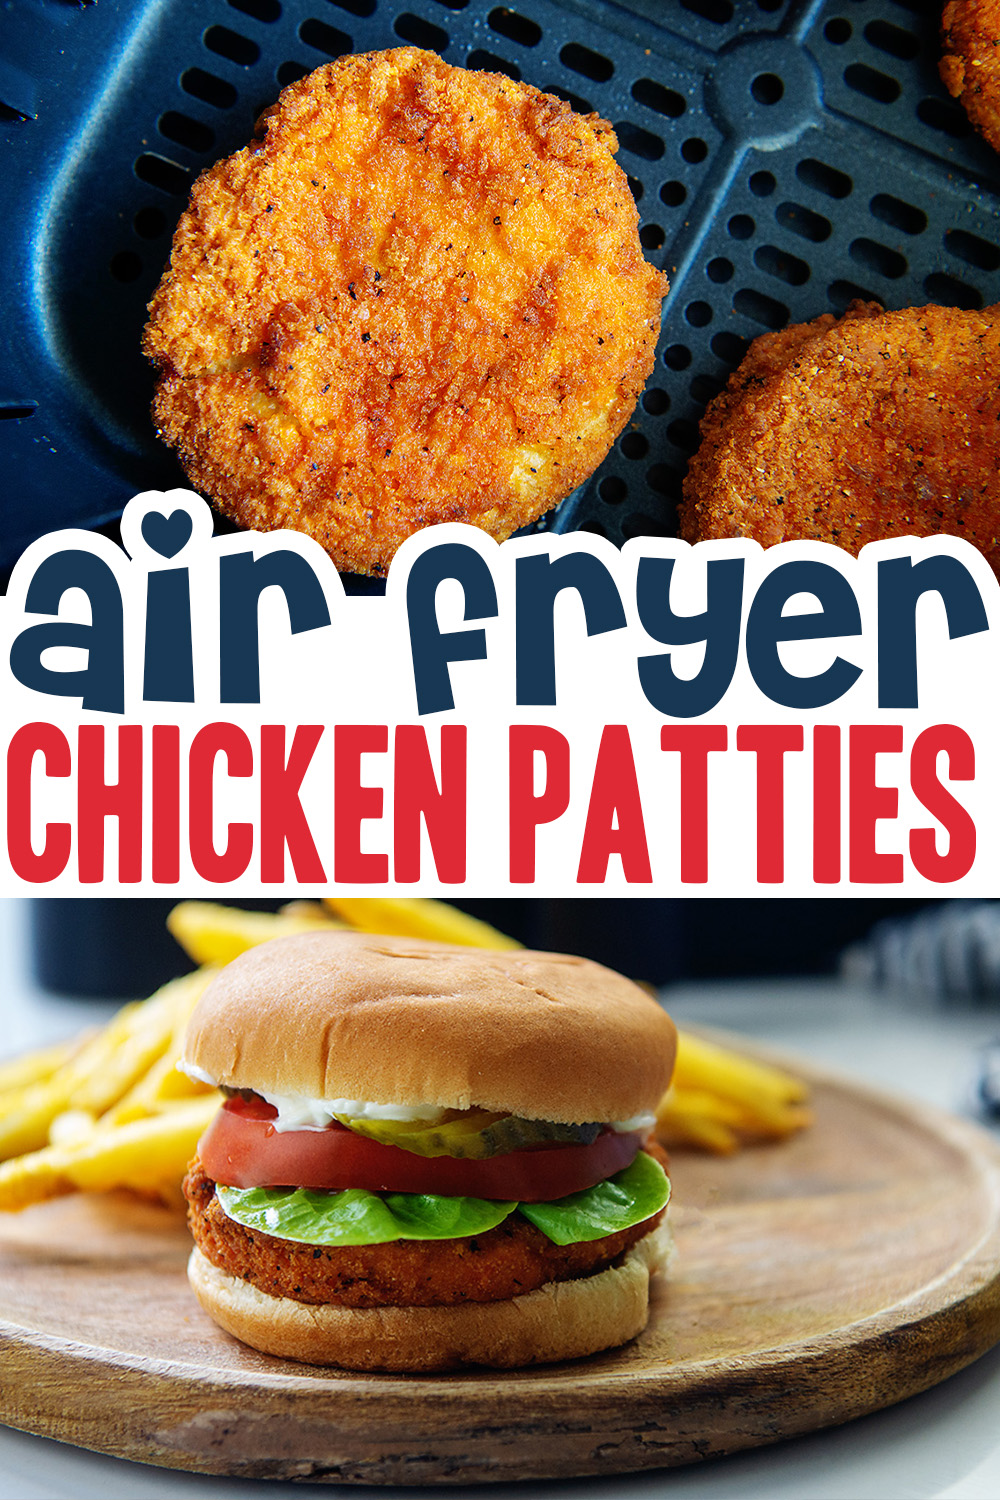 Use your air fryer and this recipe to make a lightly crispy chicken sandwich patty!